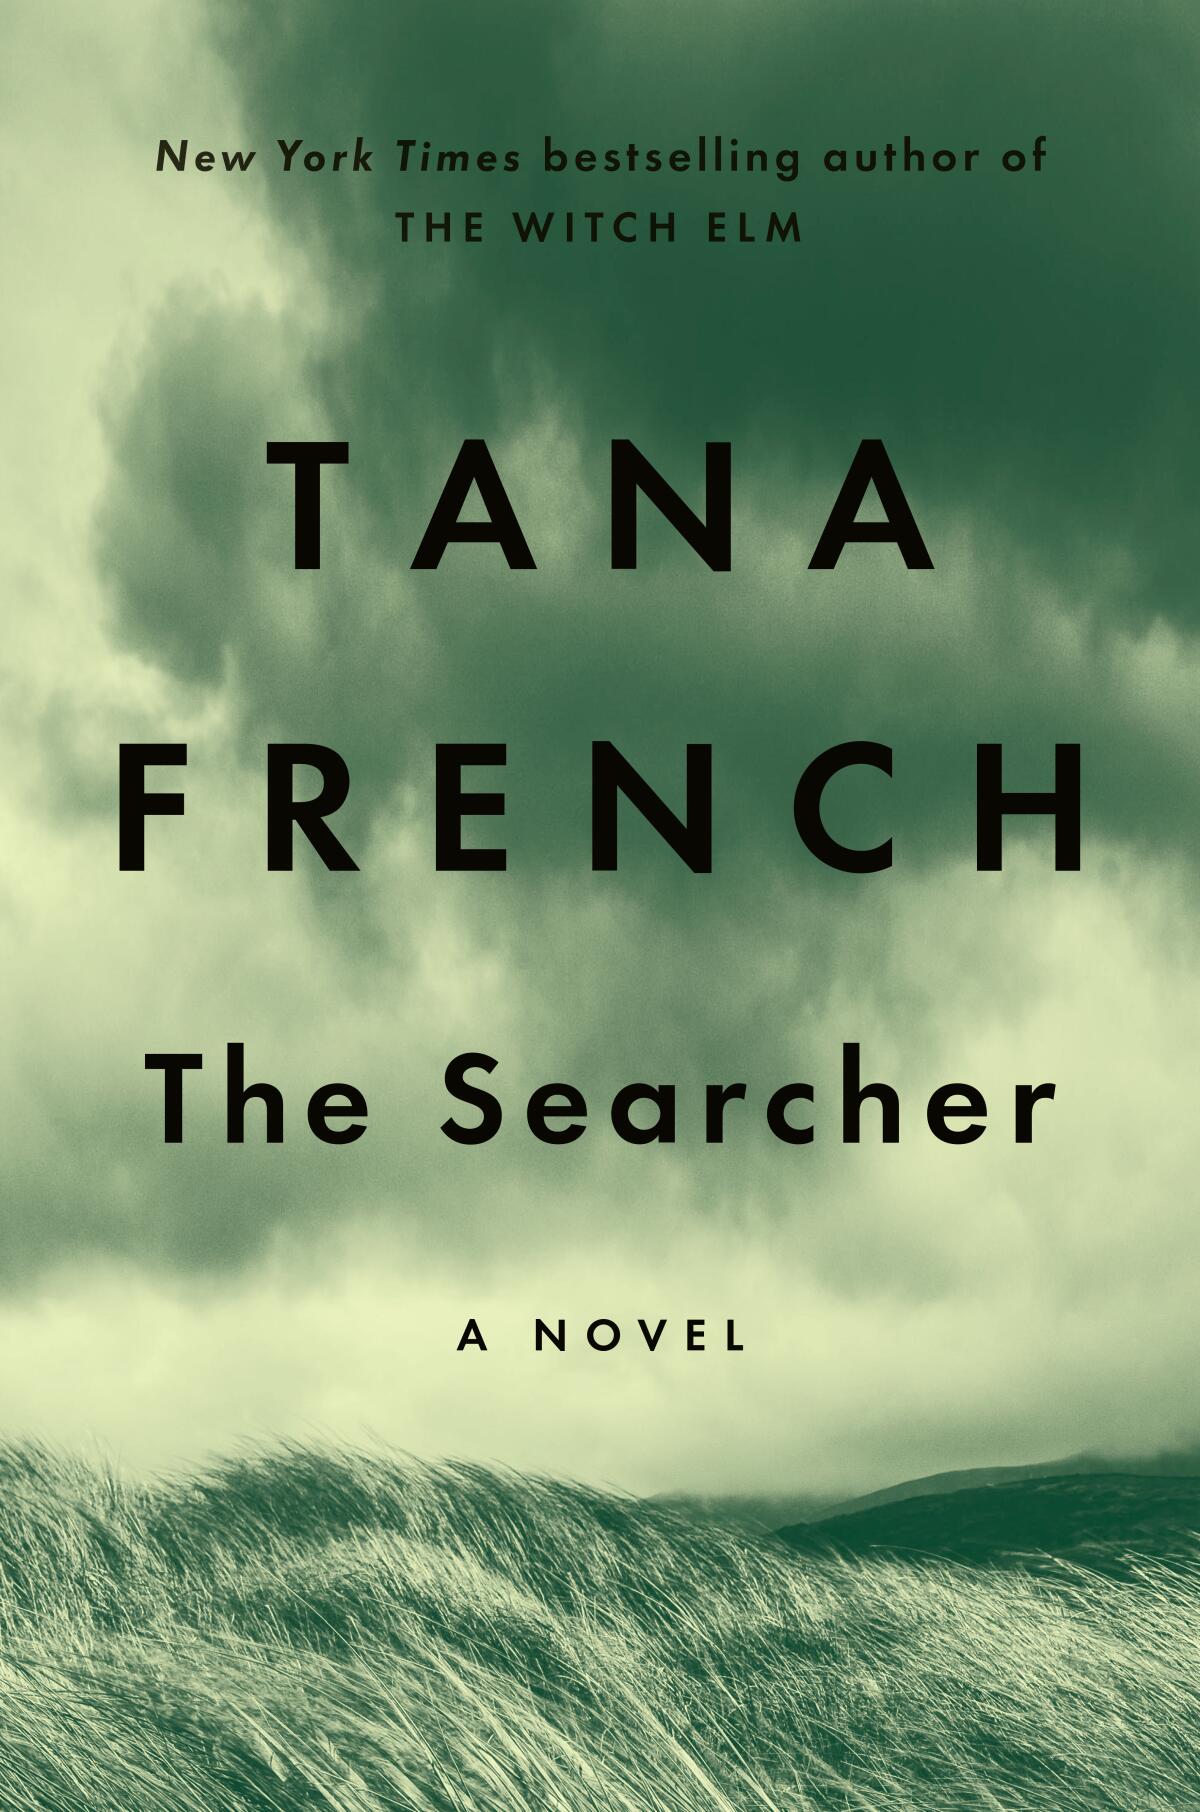 A cover for "The Searcher" by Tana French